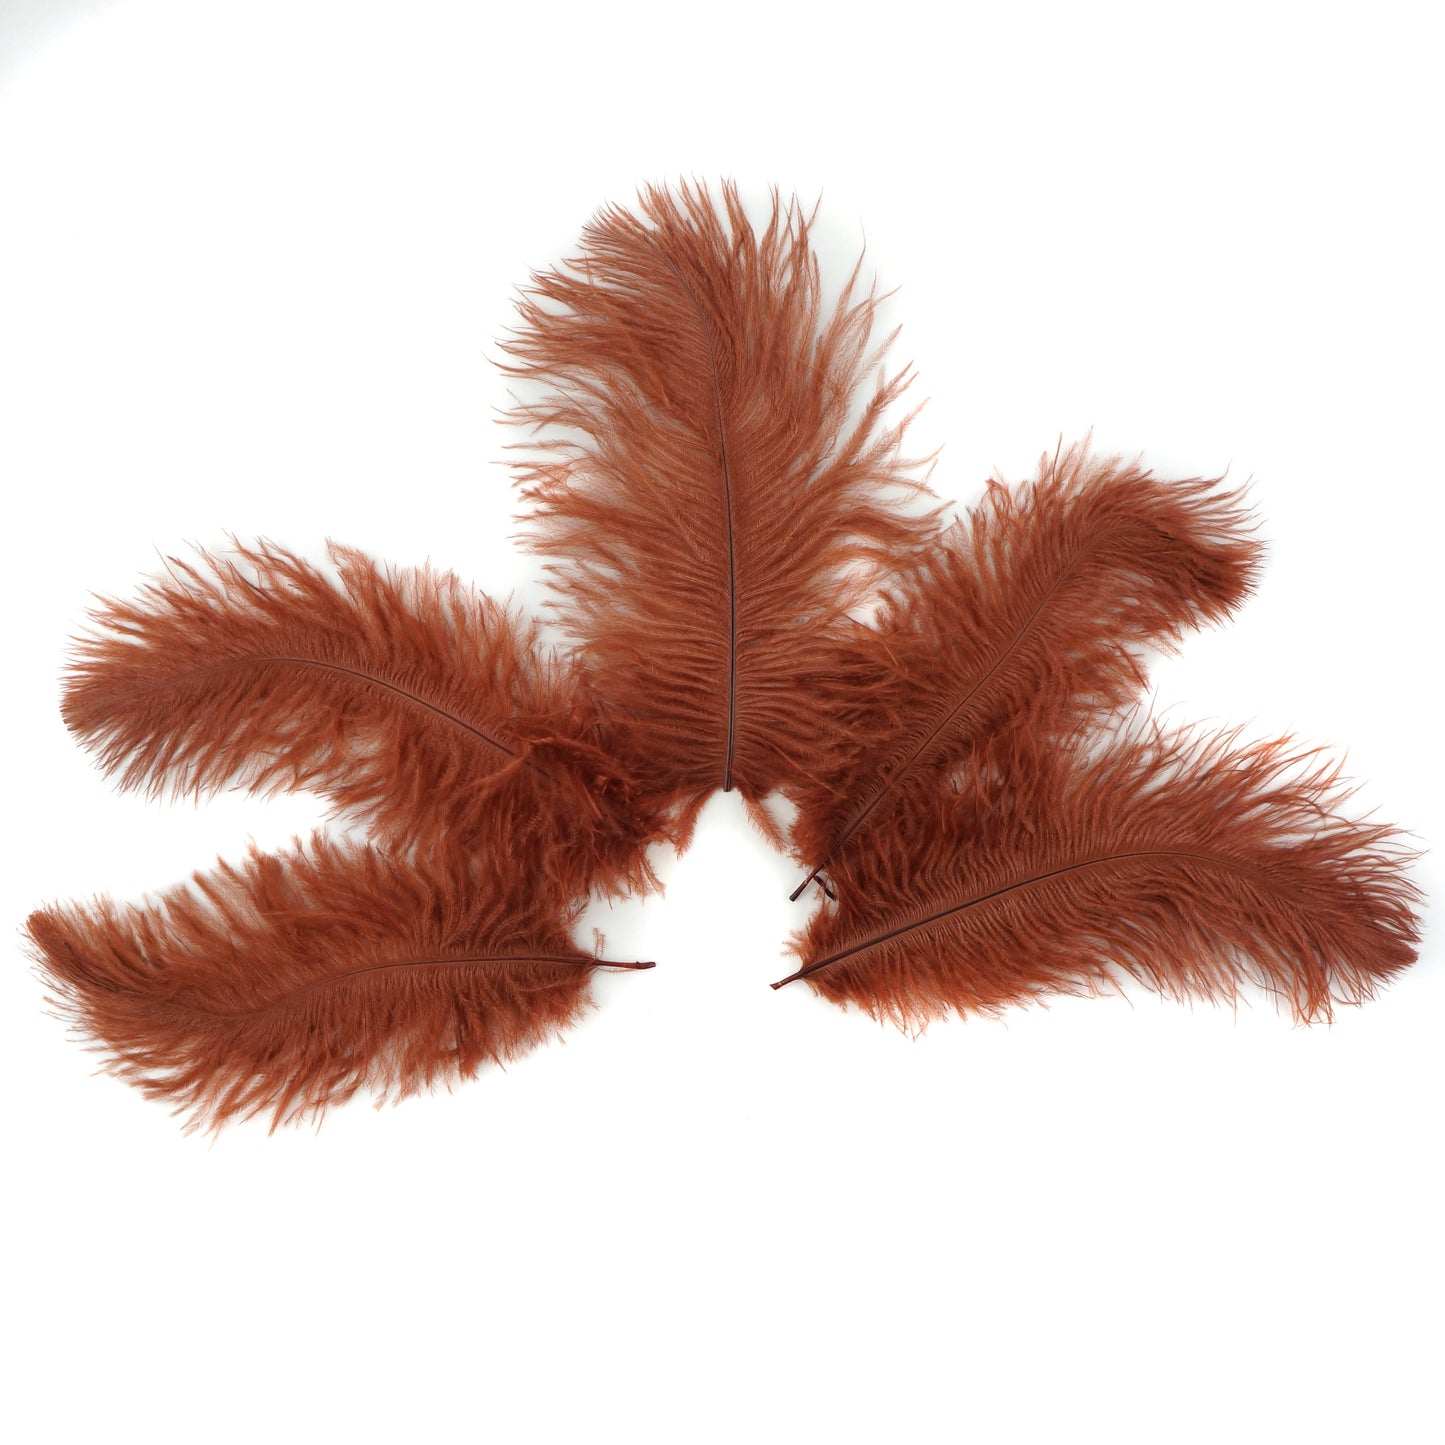 Ostrich Feathers 4-8" Drabs - Copper